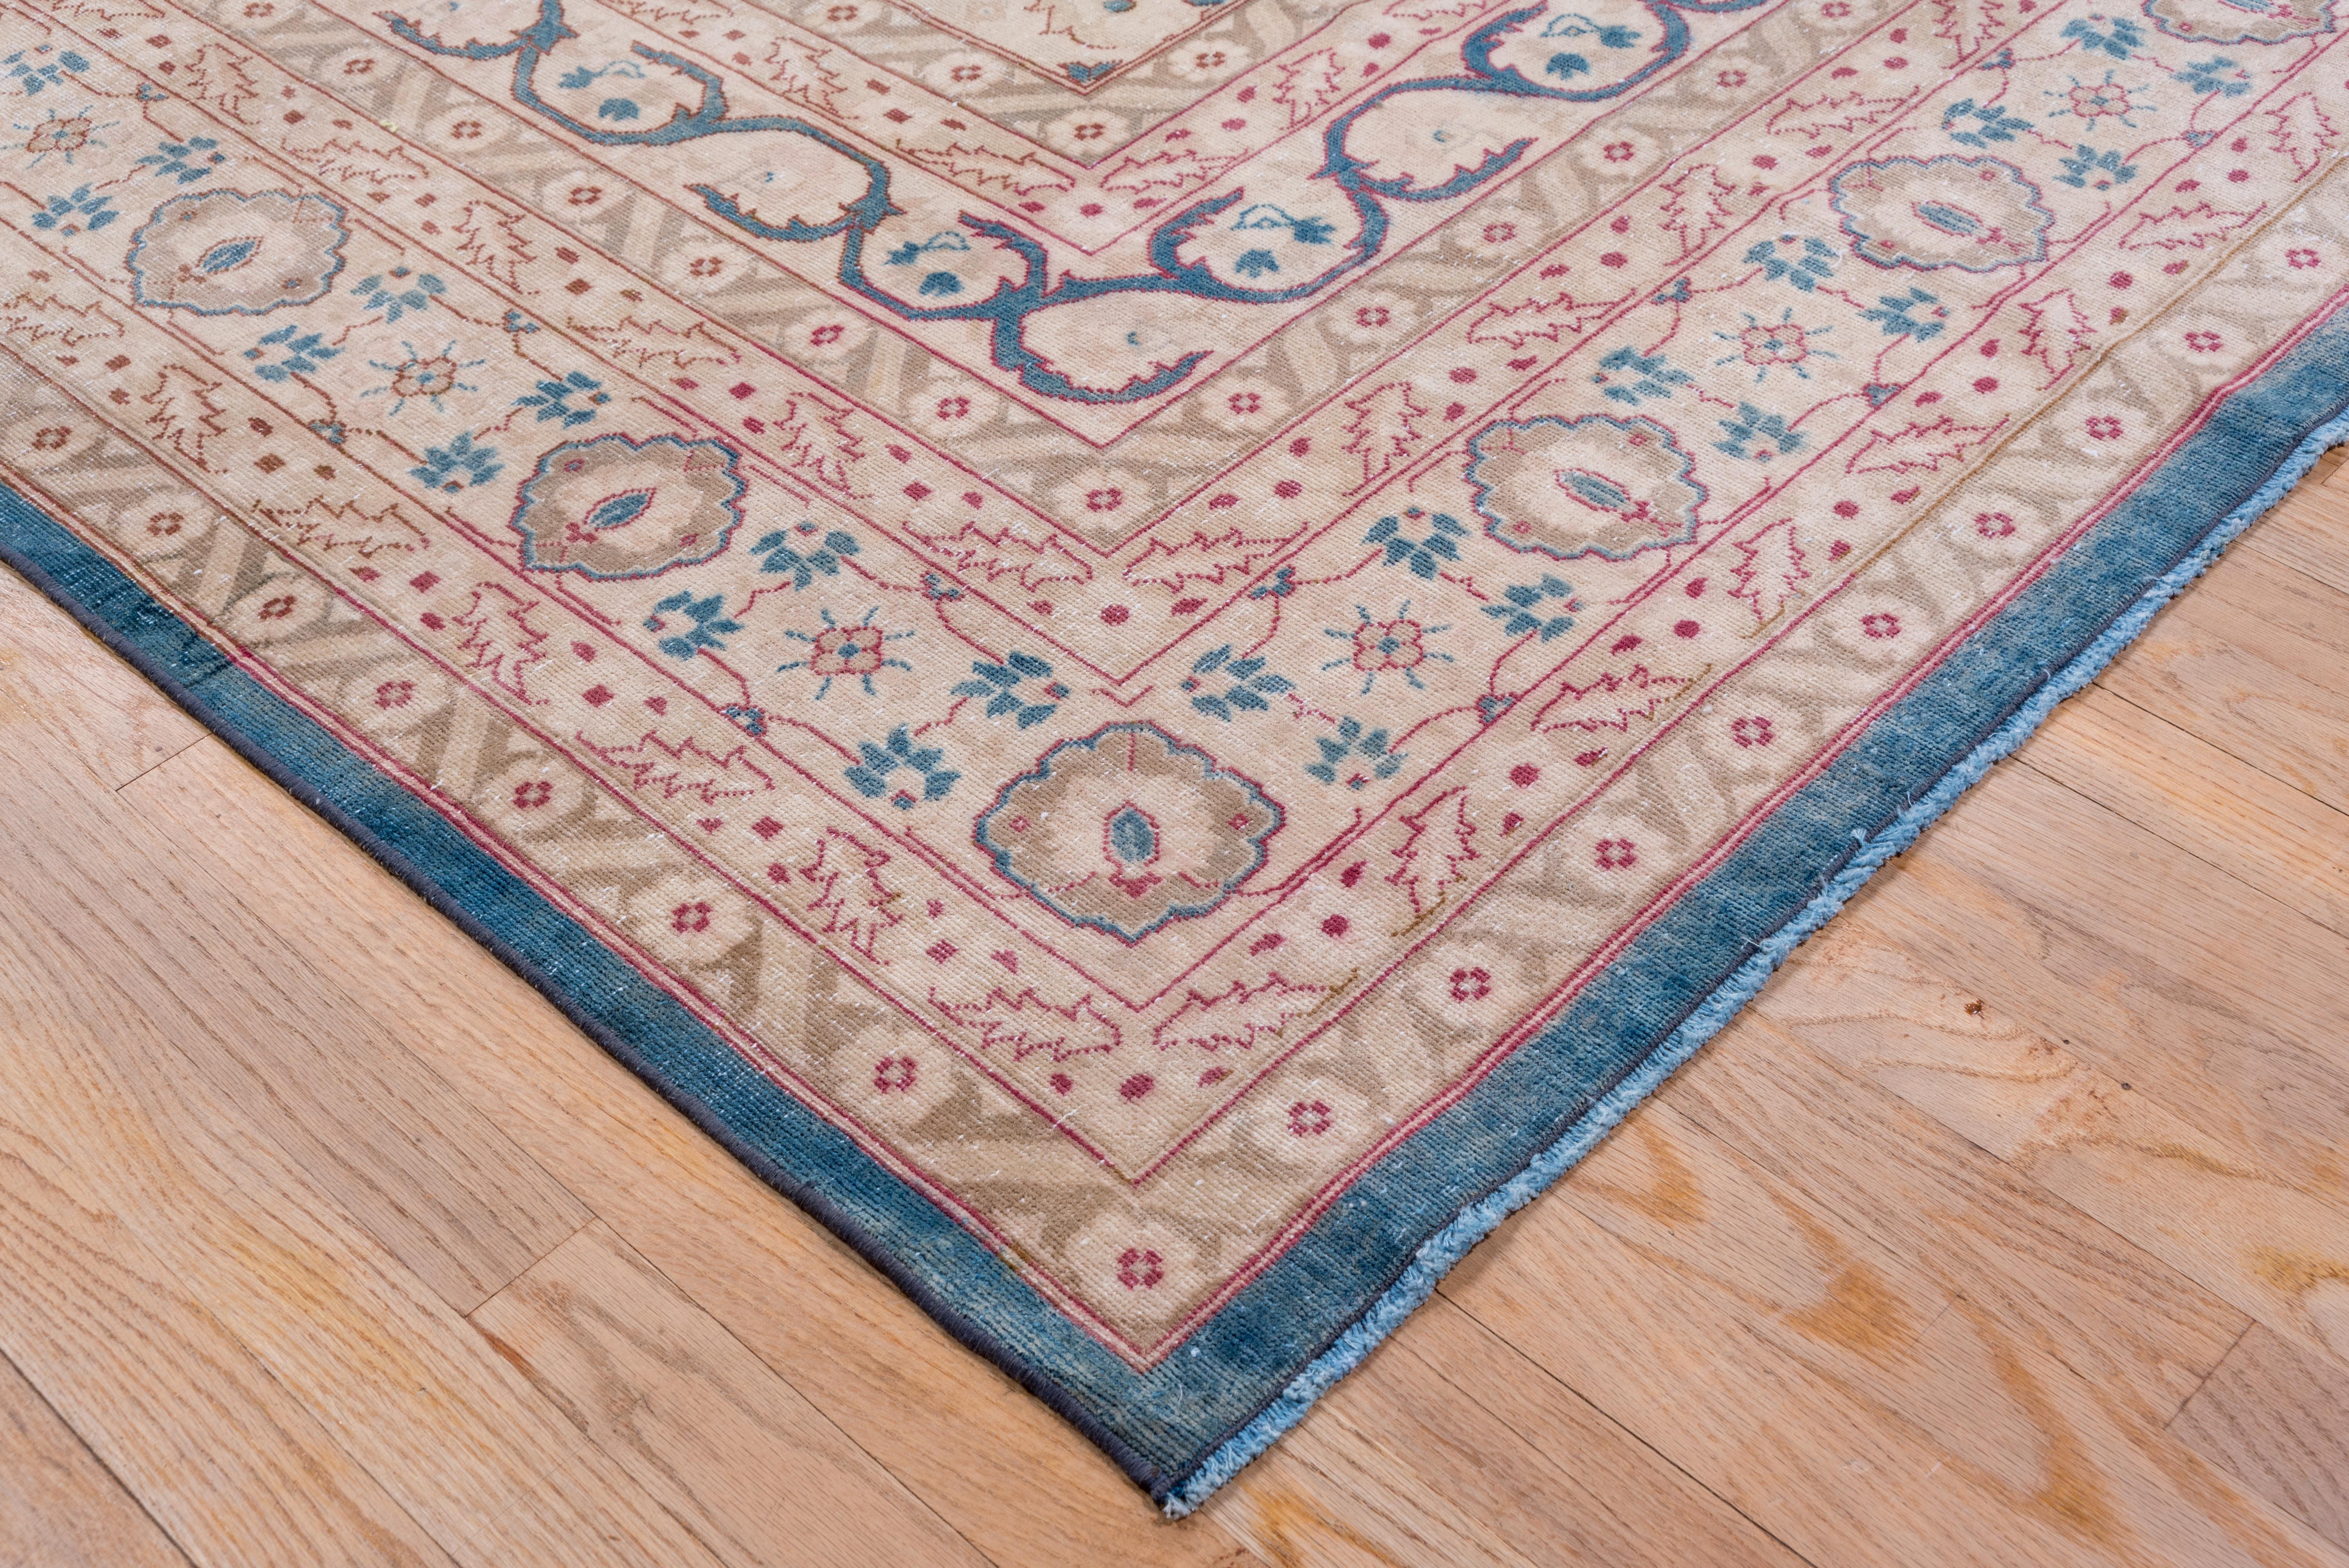 This NW Persian finely woven city carpet presents a lightly lobed off white medallion on a denim blue ground with delicate flower sprays in each corner outside of off white quarter medallion corners. S-scroll inner border.